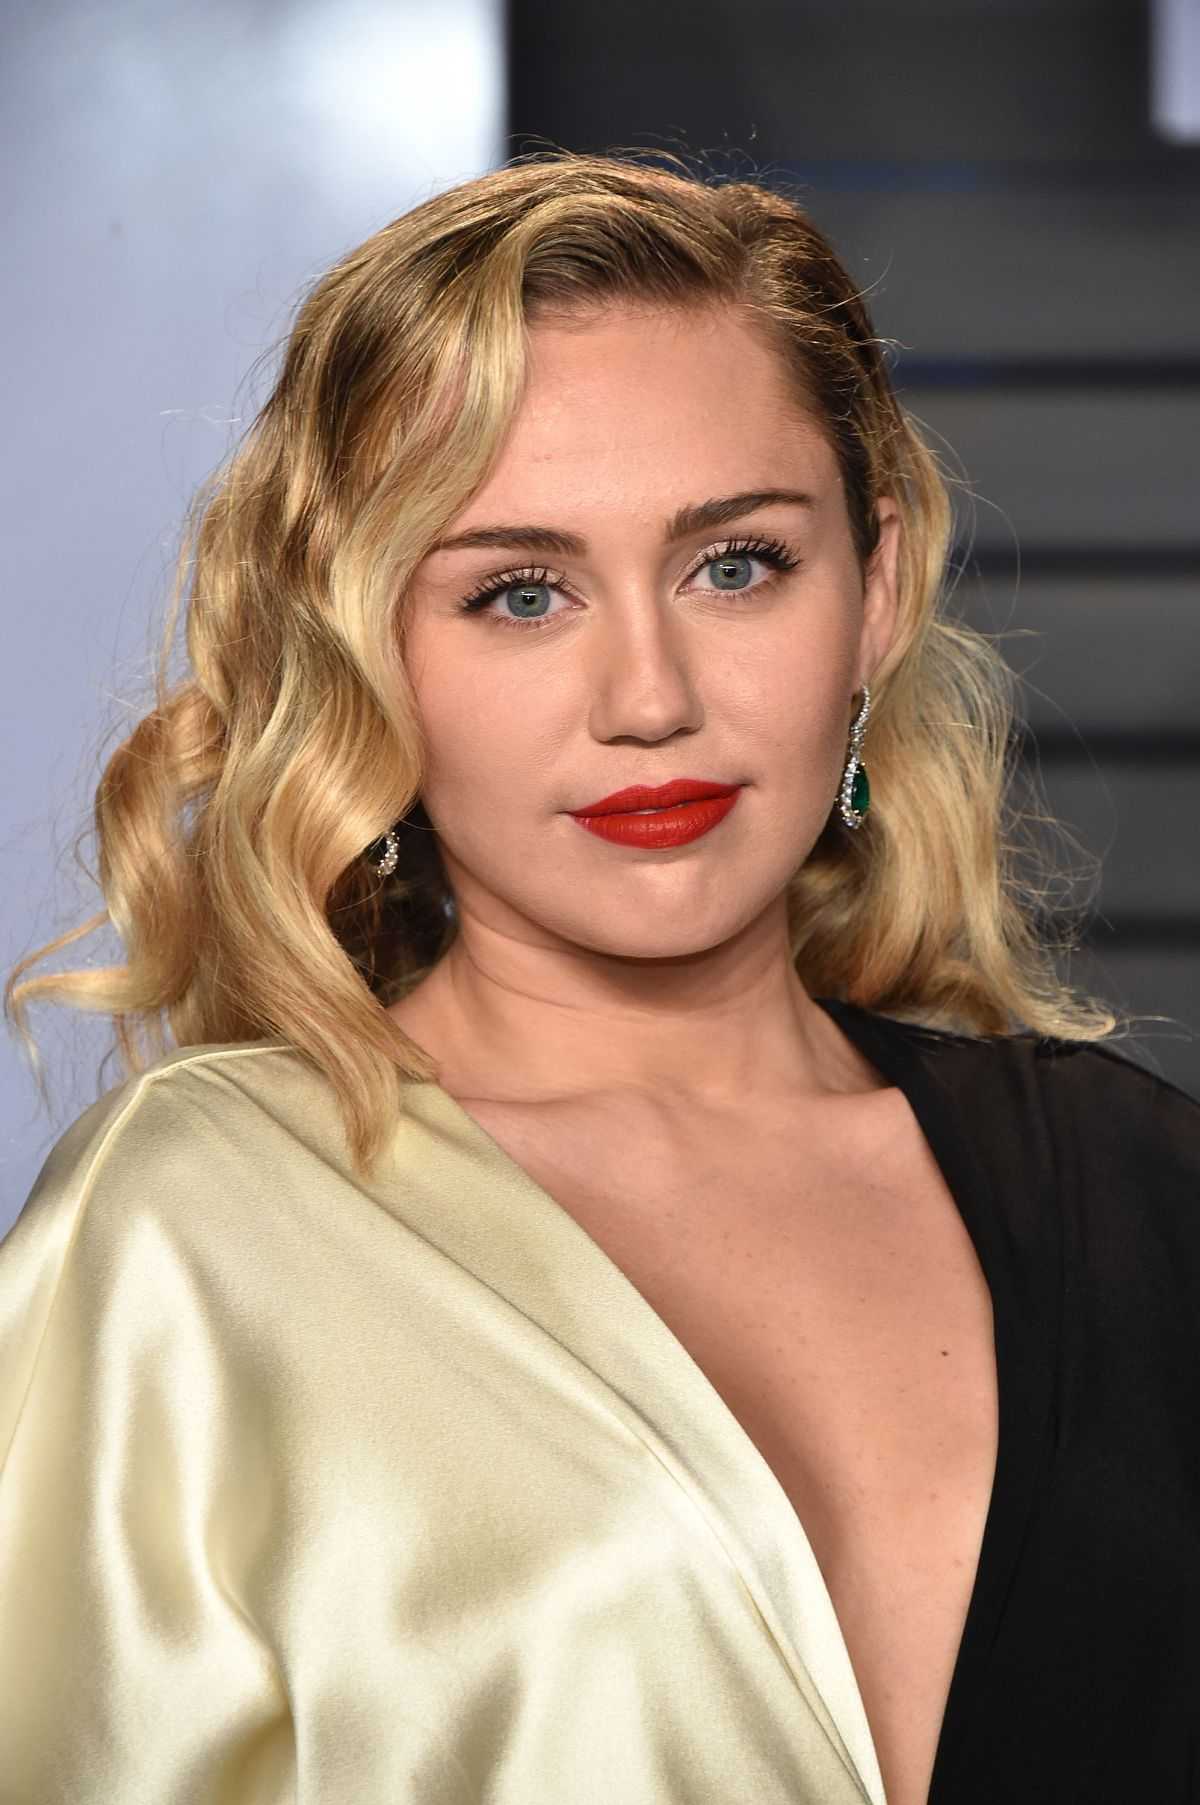 61 Hot Pictures Of Miley Cyrus Butt Will Prove That She Is One Of The Hottest And Sexiest Women There Is | Best Of Comic Books